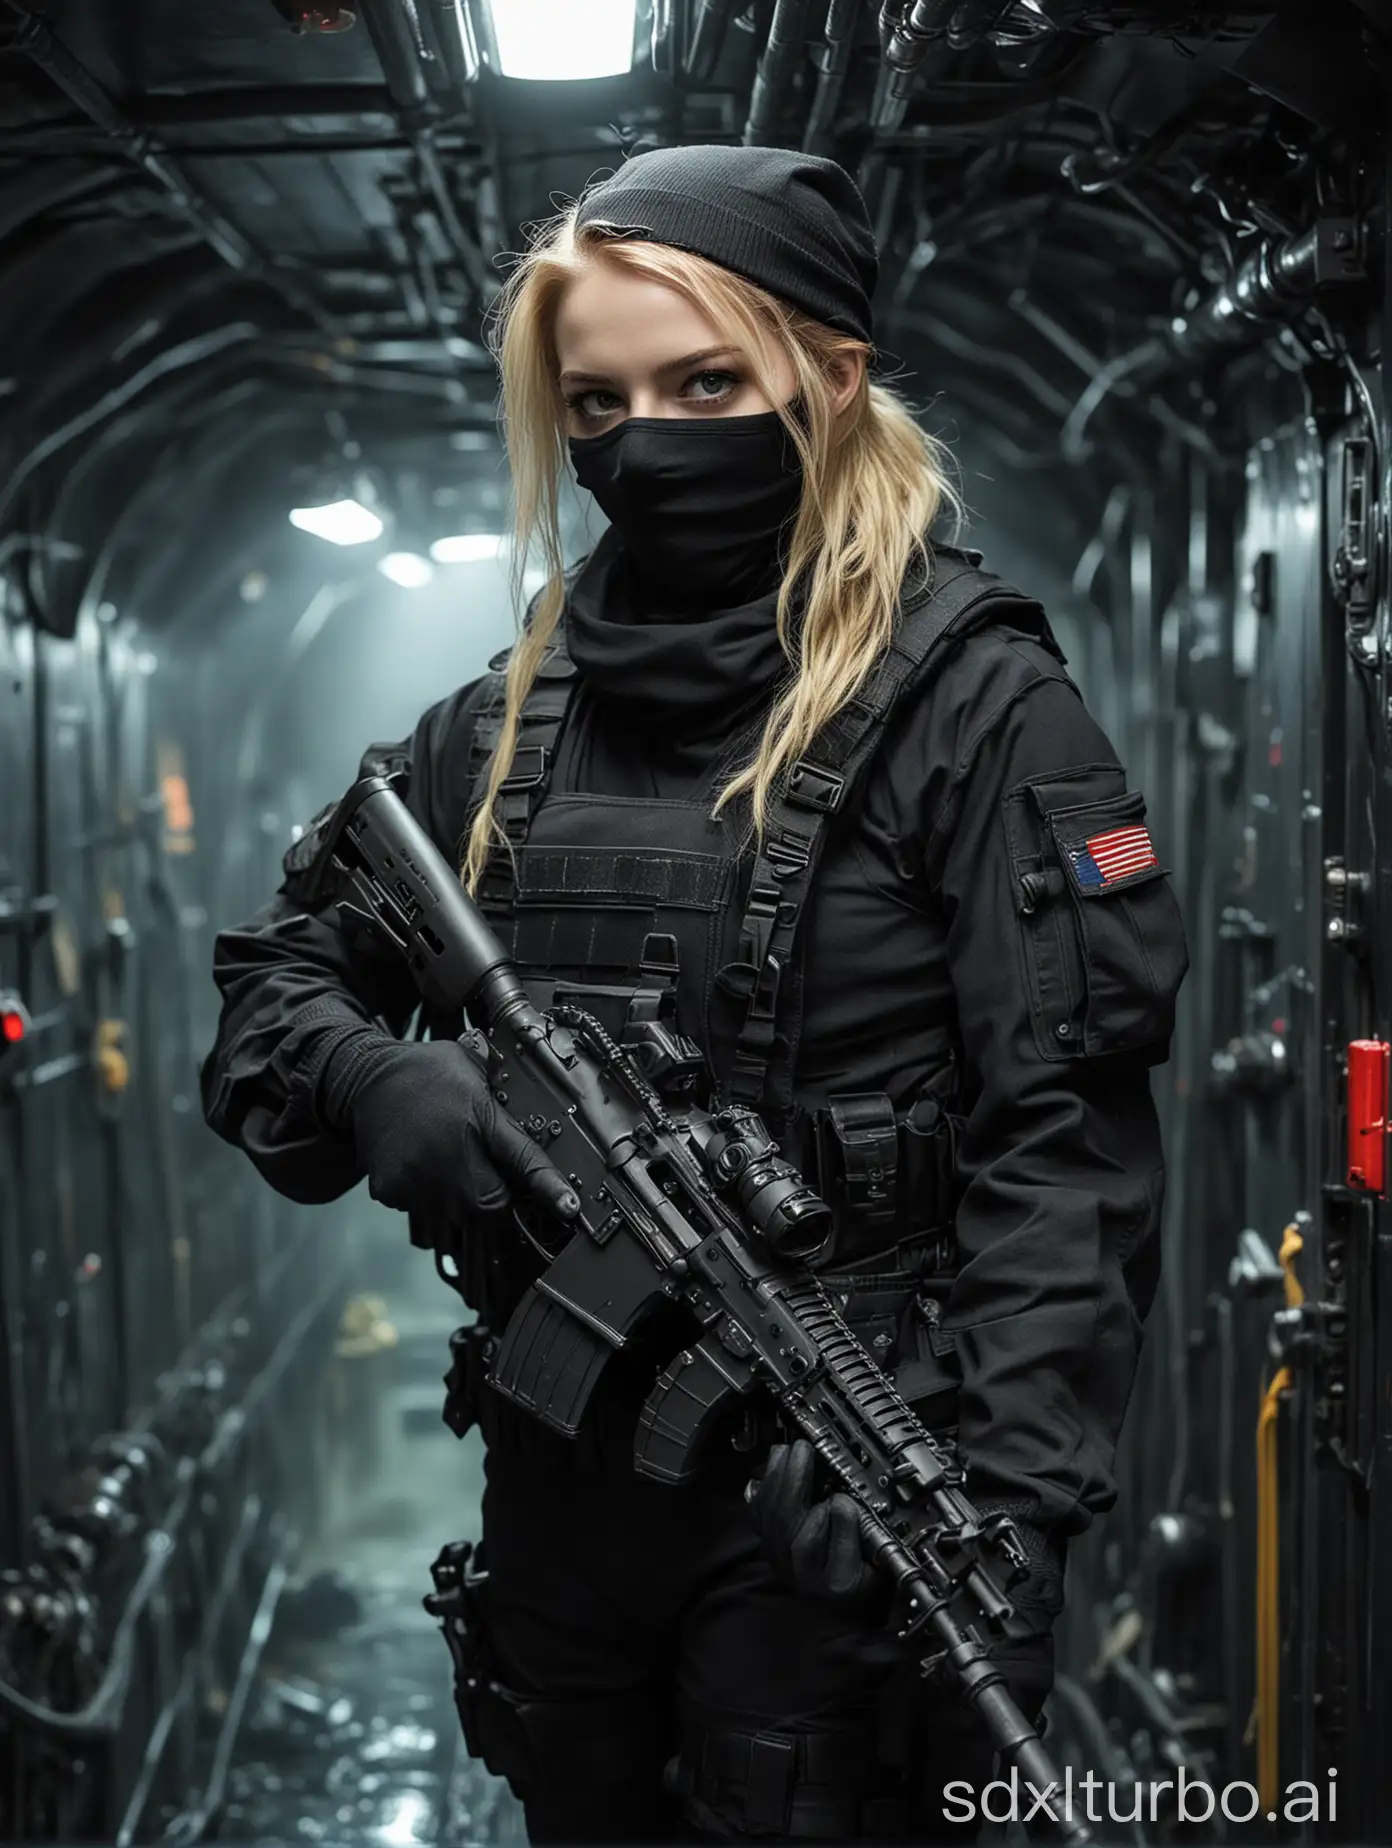 Hermosa chica pelirroja of very pale white skin in black black tactical military uniform wearing a black balaclava, black tactical gloves, carrying an assault rifle, inside a submarine, red lights